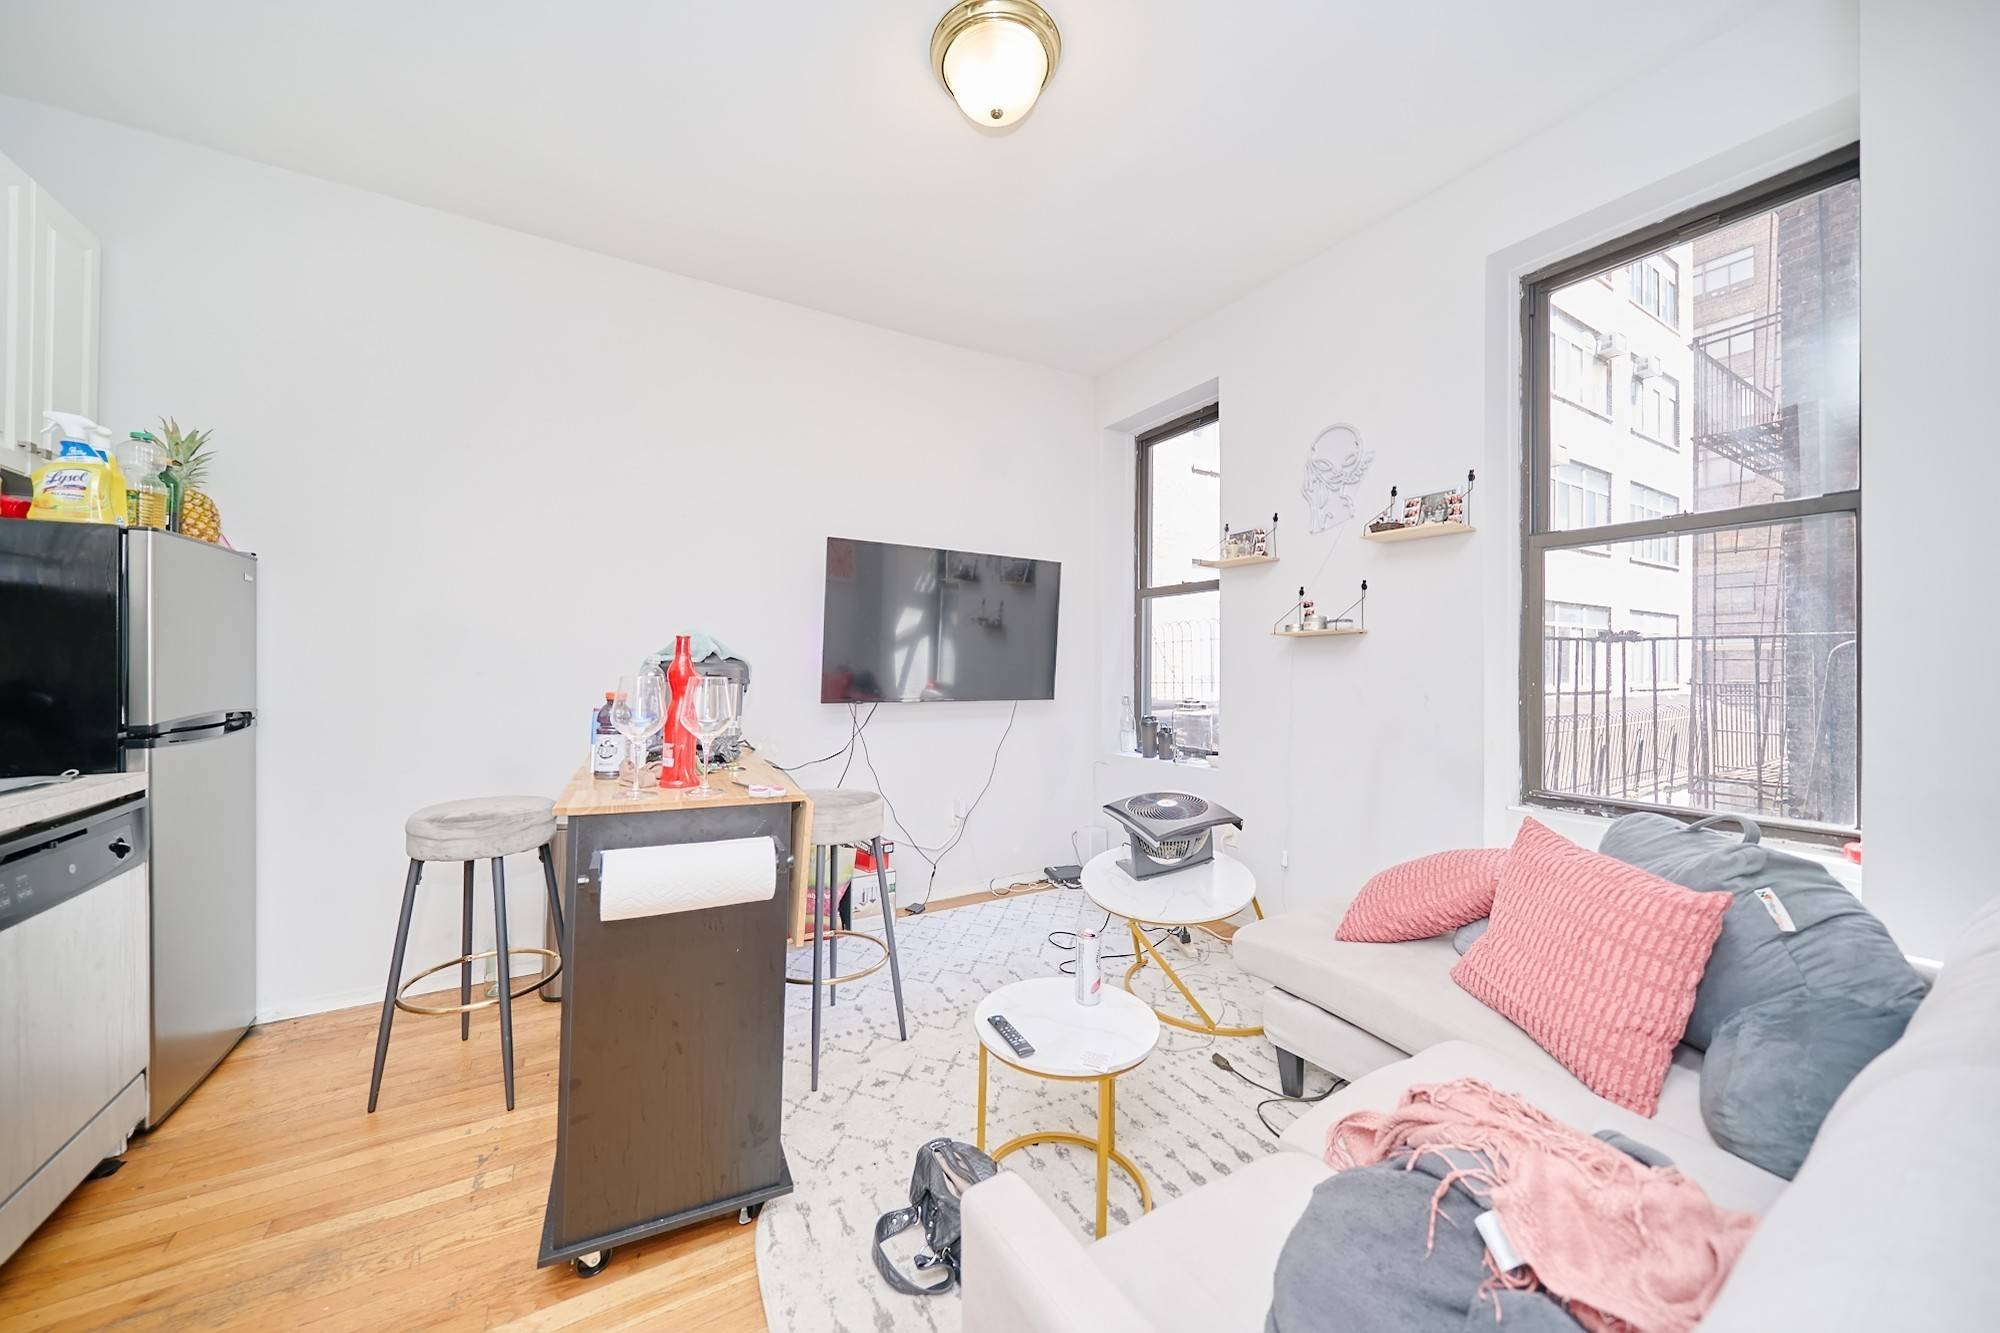 APARTMENT FEATURESQueen Sized BedroomsWasher Dryer in UnitWhite Kitchen CabinetsDishwasherStainless Steel AppliancesBright amp ; SunnyHardwood FloorsWood Kitchen CabinetsAbundant Closets SpaceBUILDING FEATURESPets allowedLive in SuperClose to the Highline